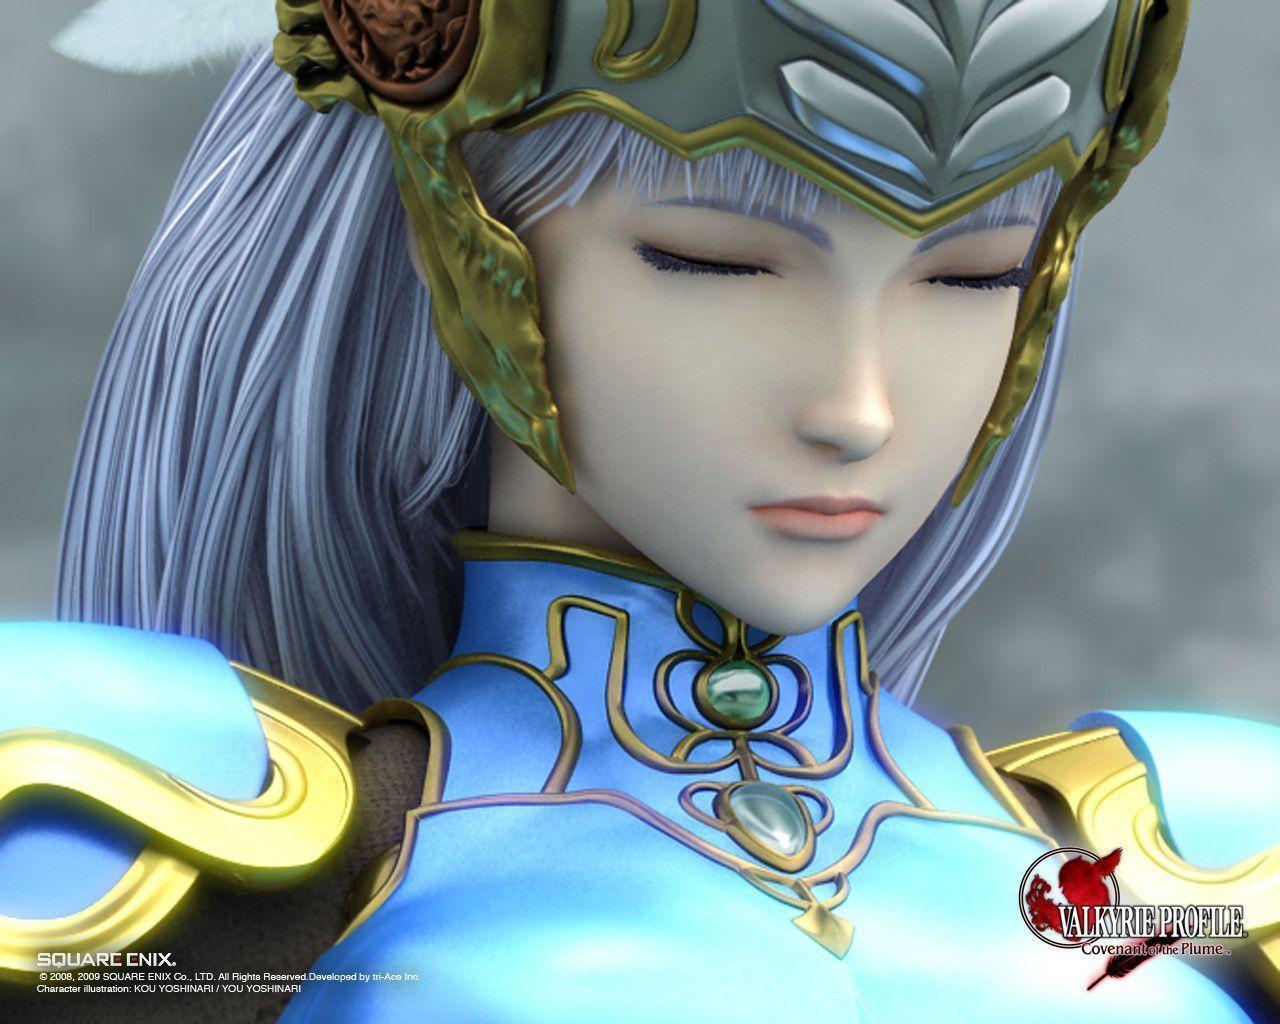 image For > Valkyrie Profile 2 Wallpaper